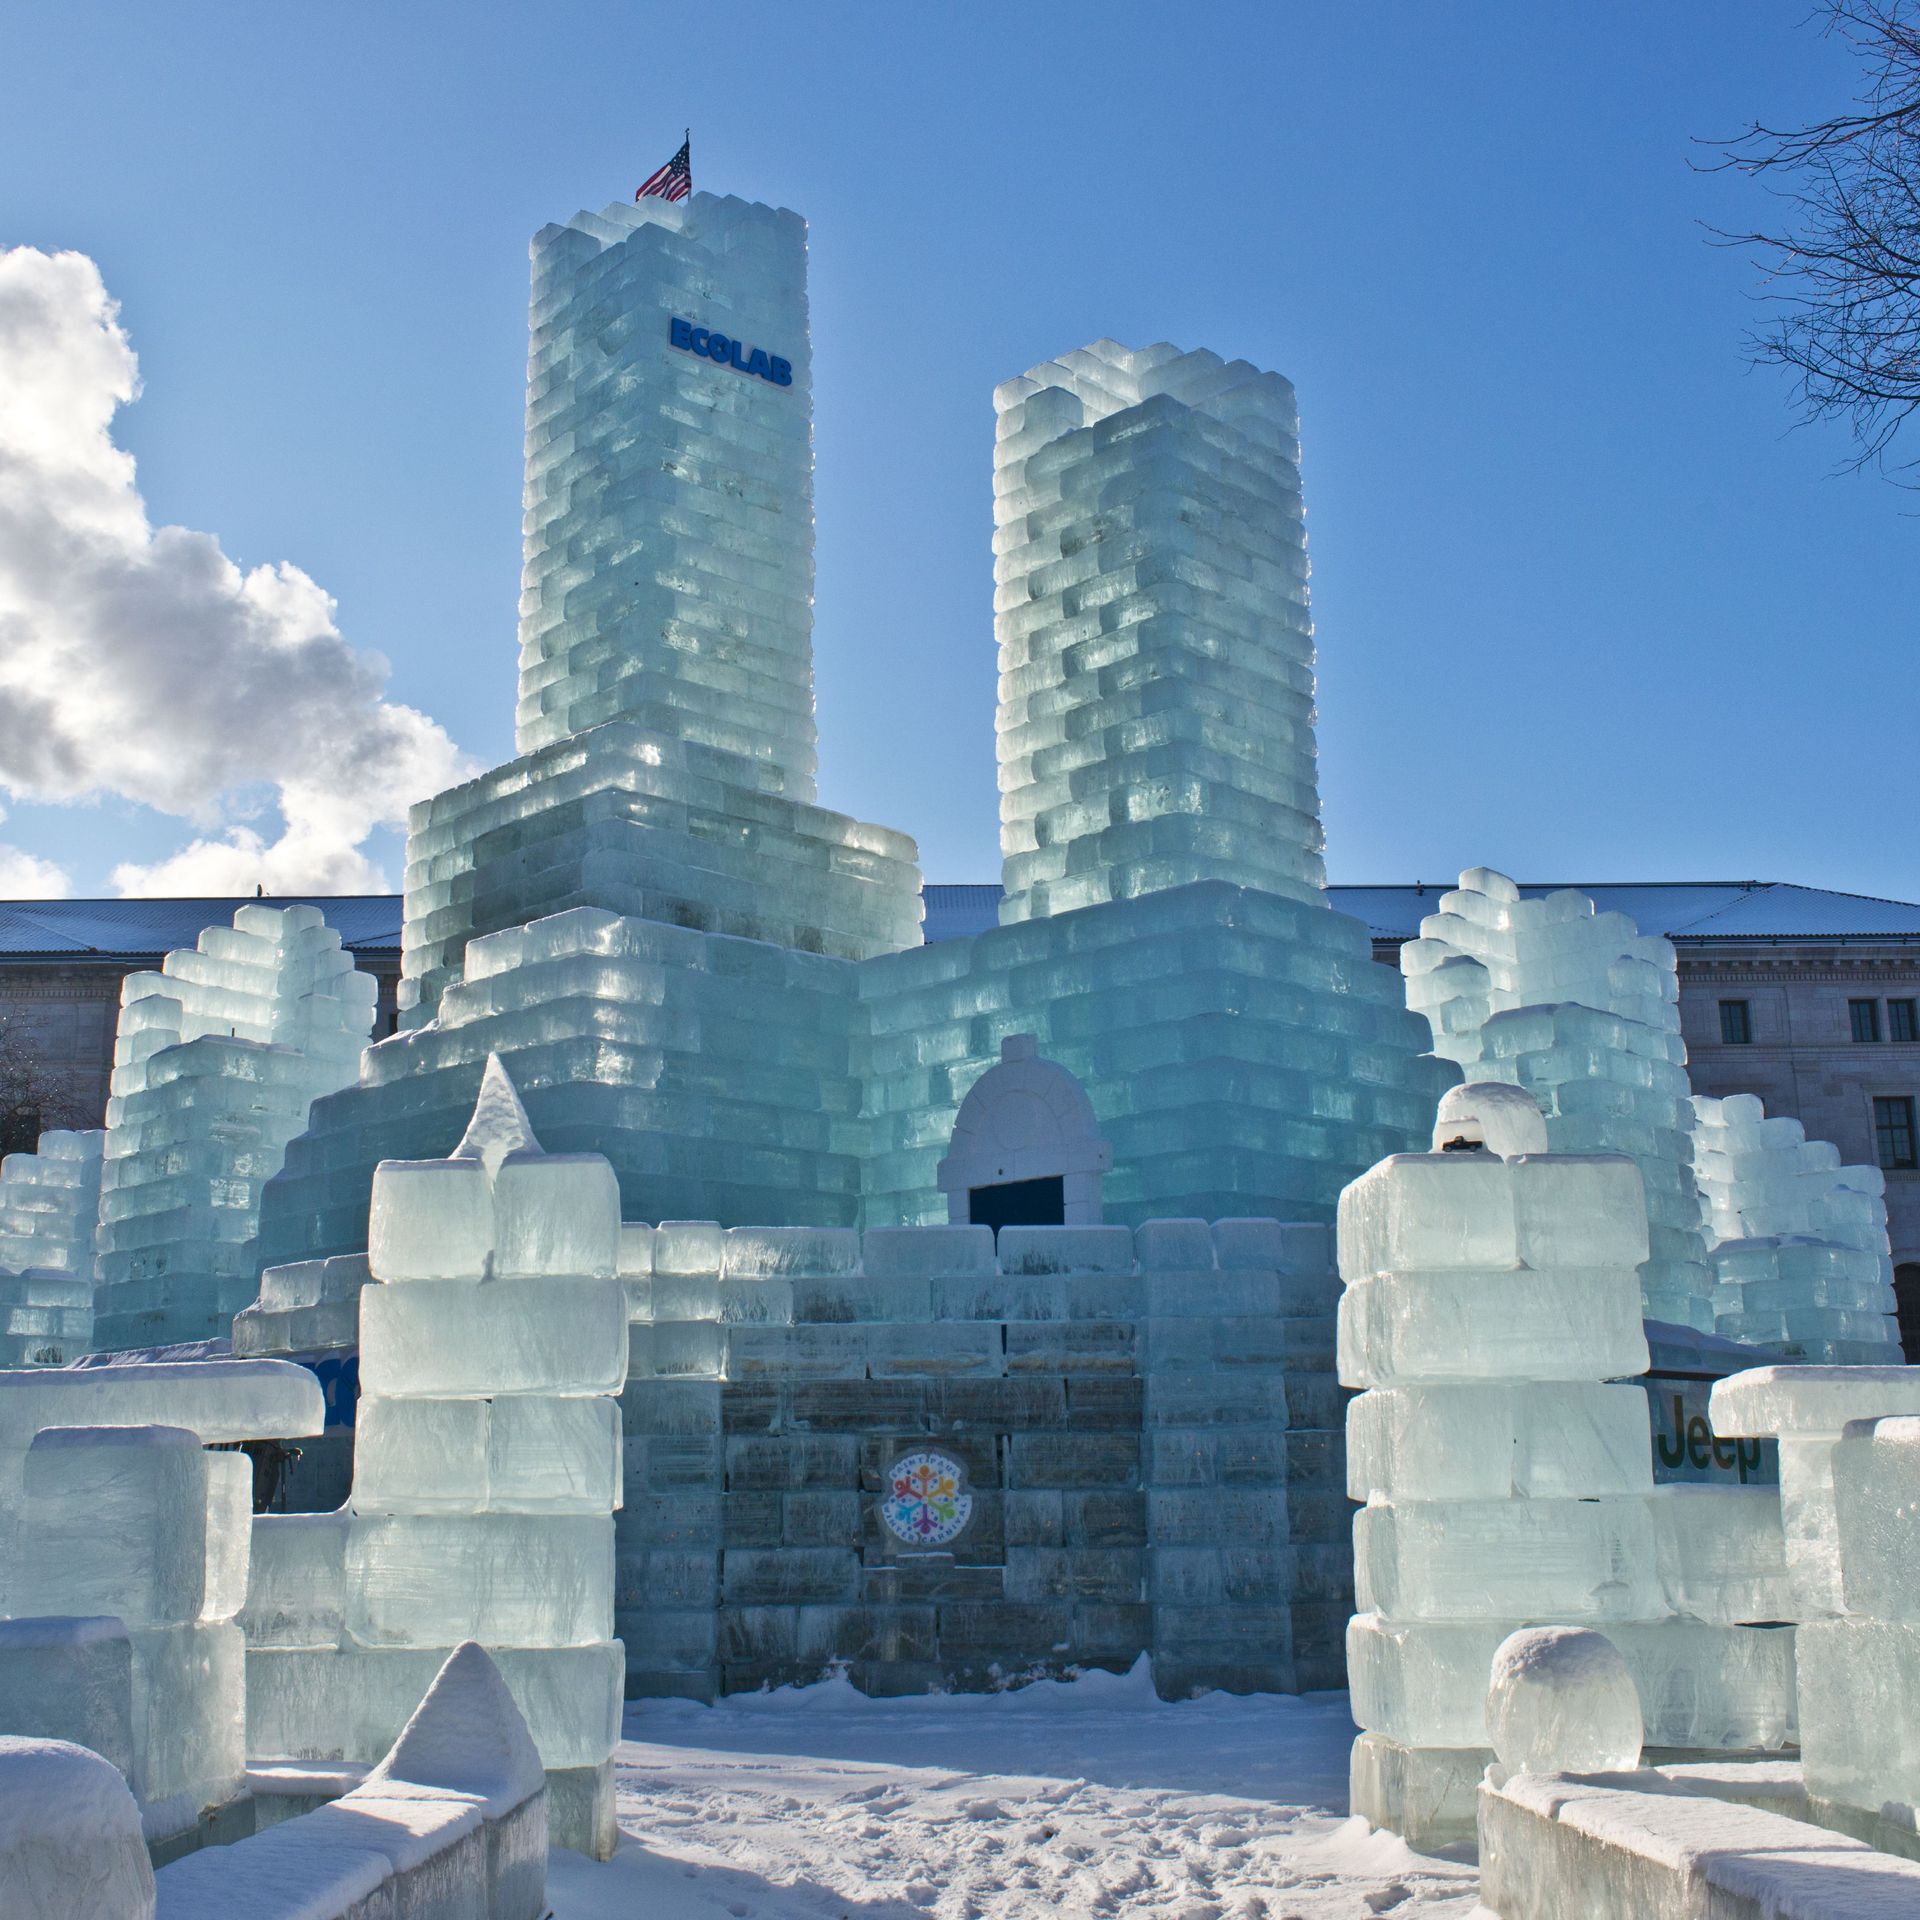 a large palace made out of ice bricks.